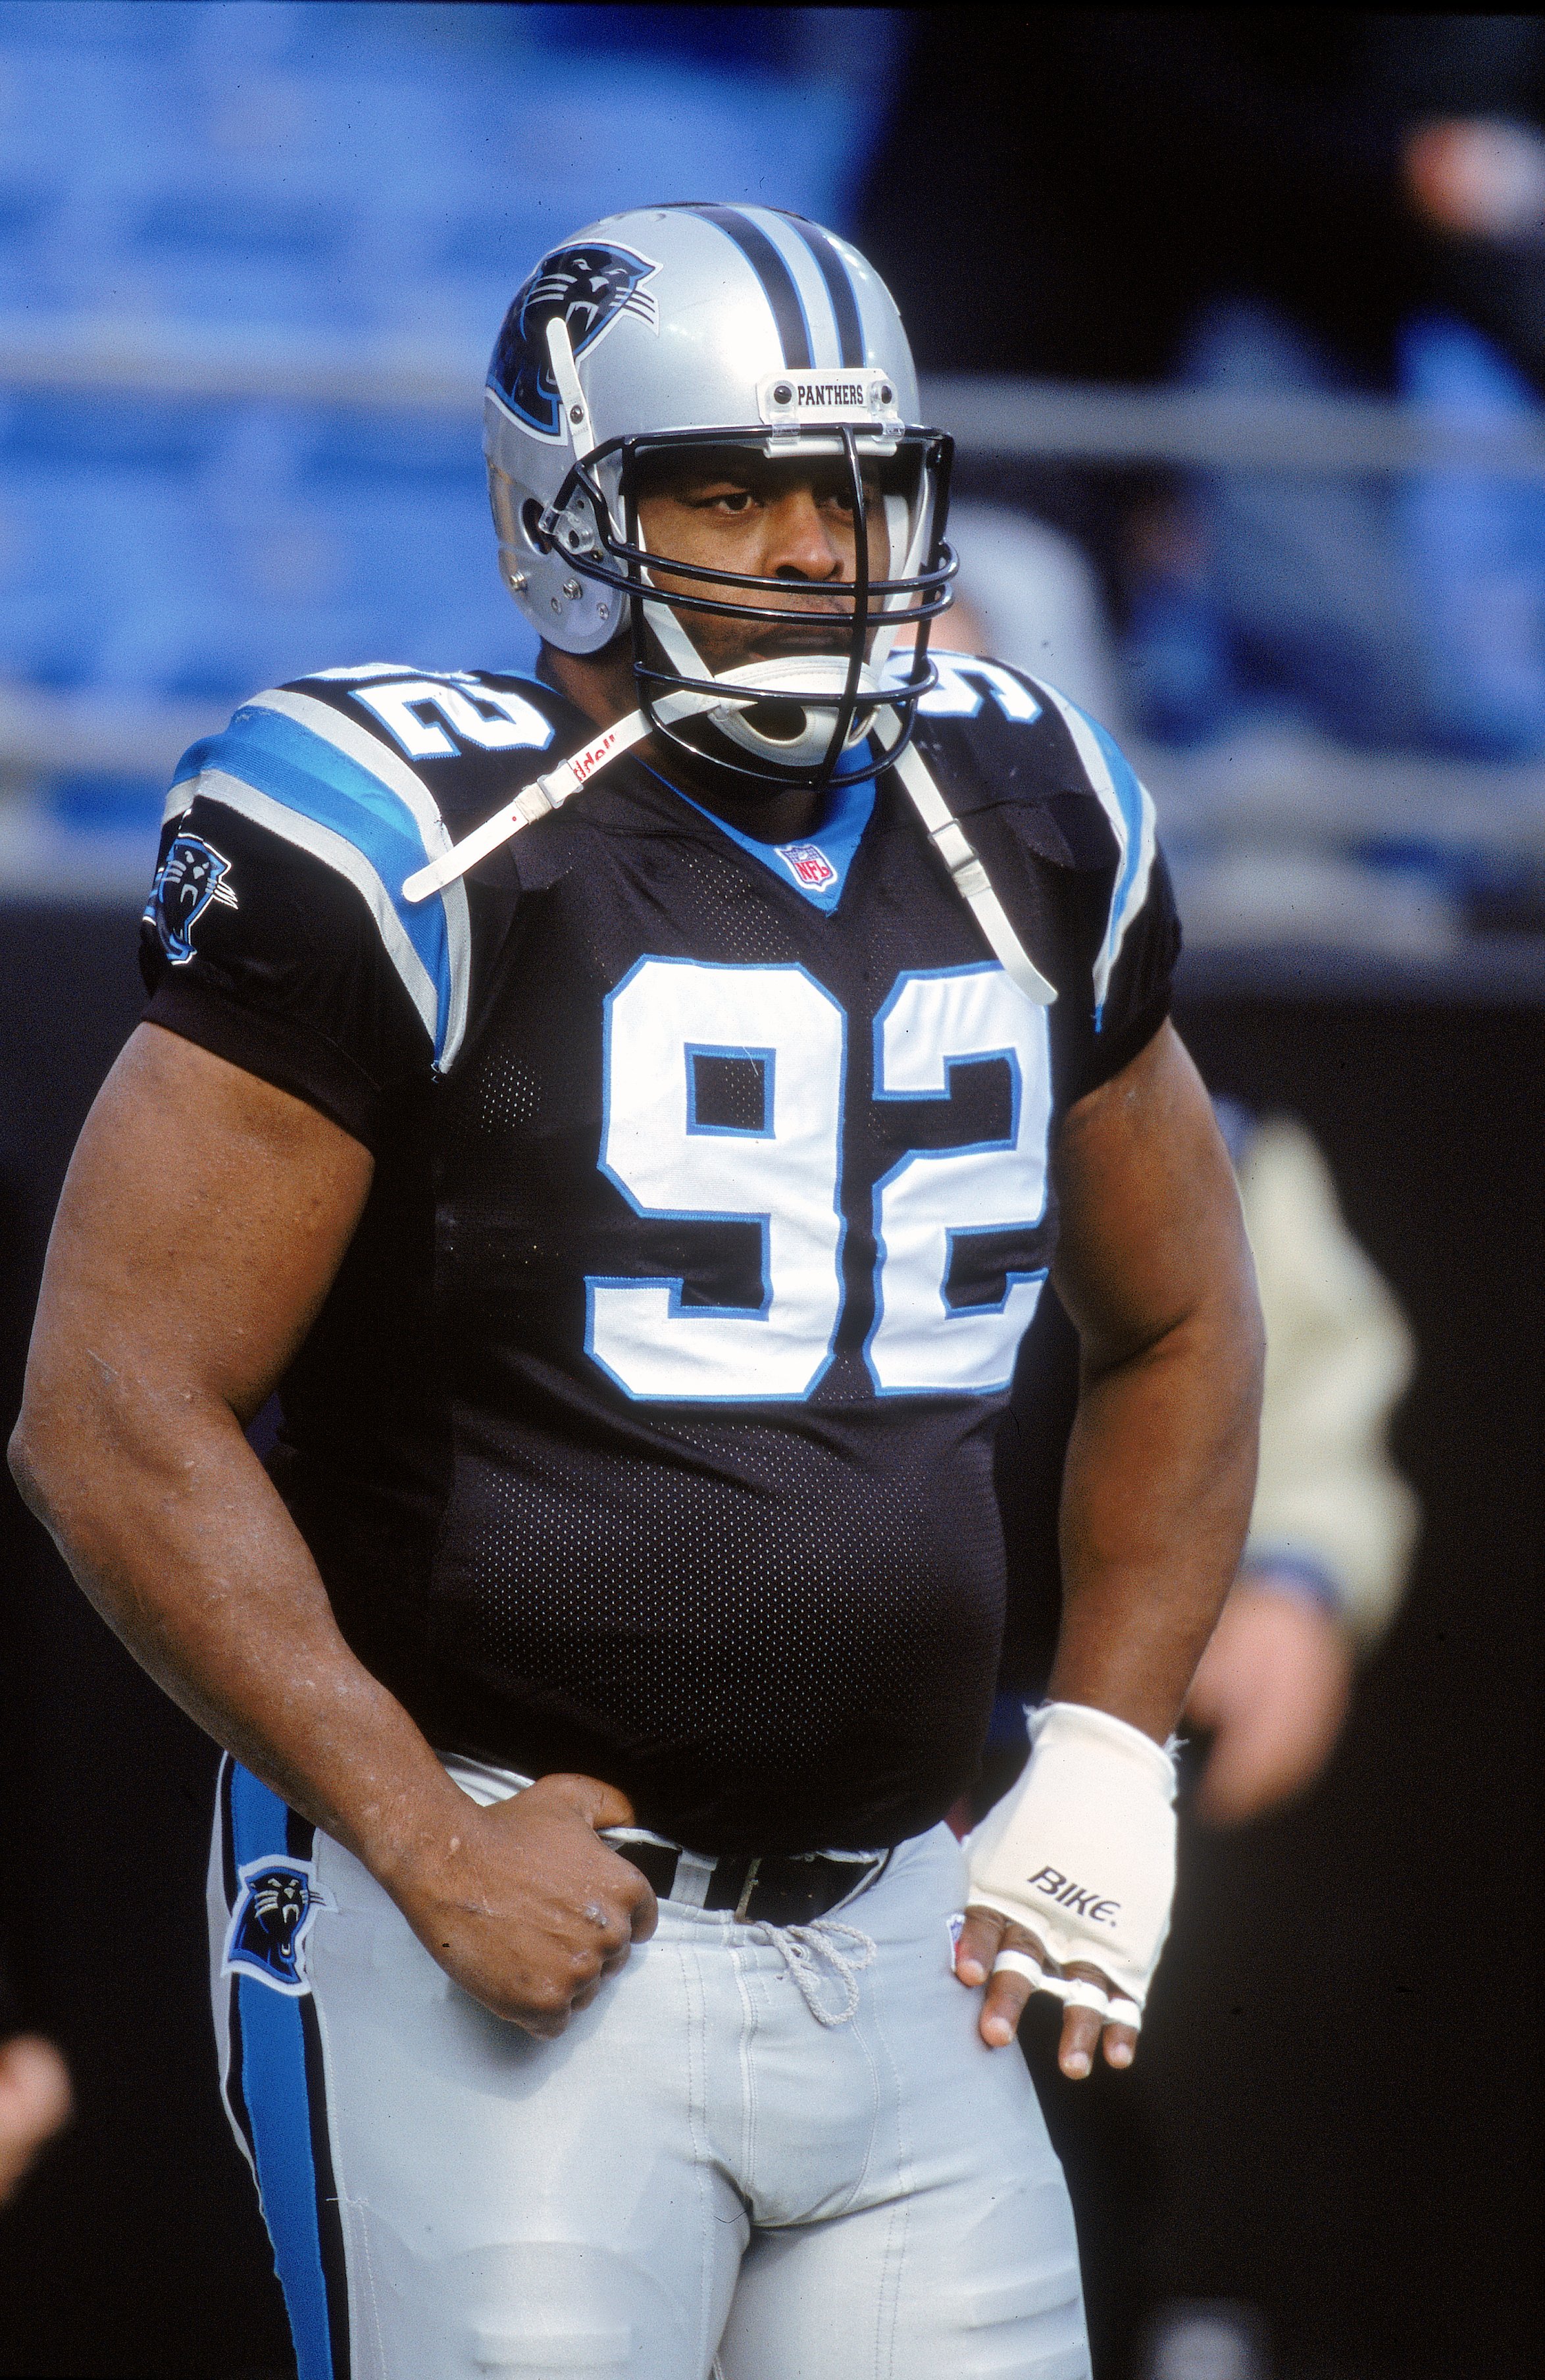 13 former NFL stars who played with 